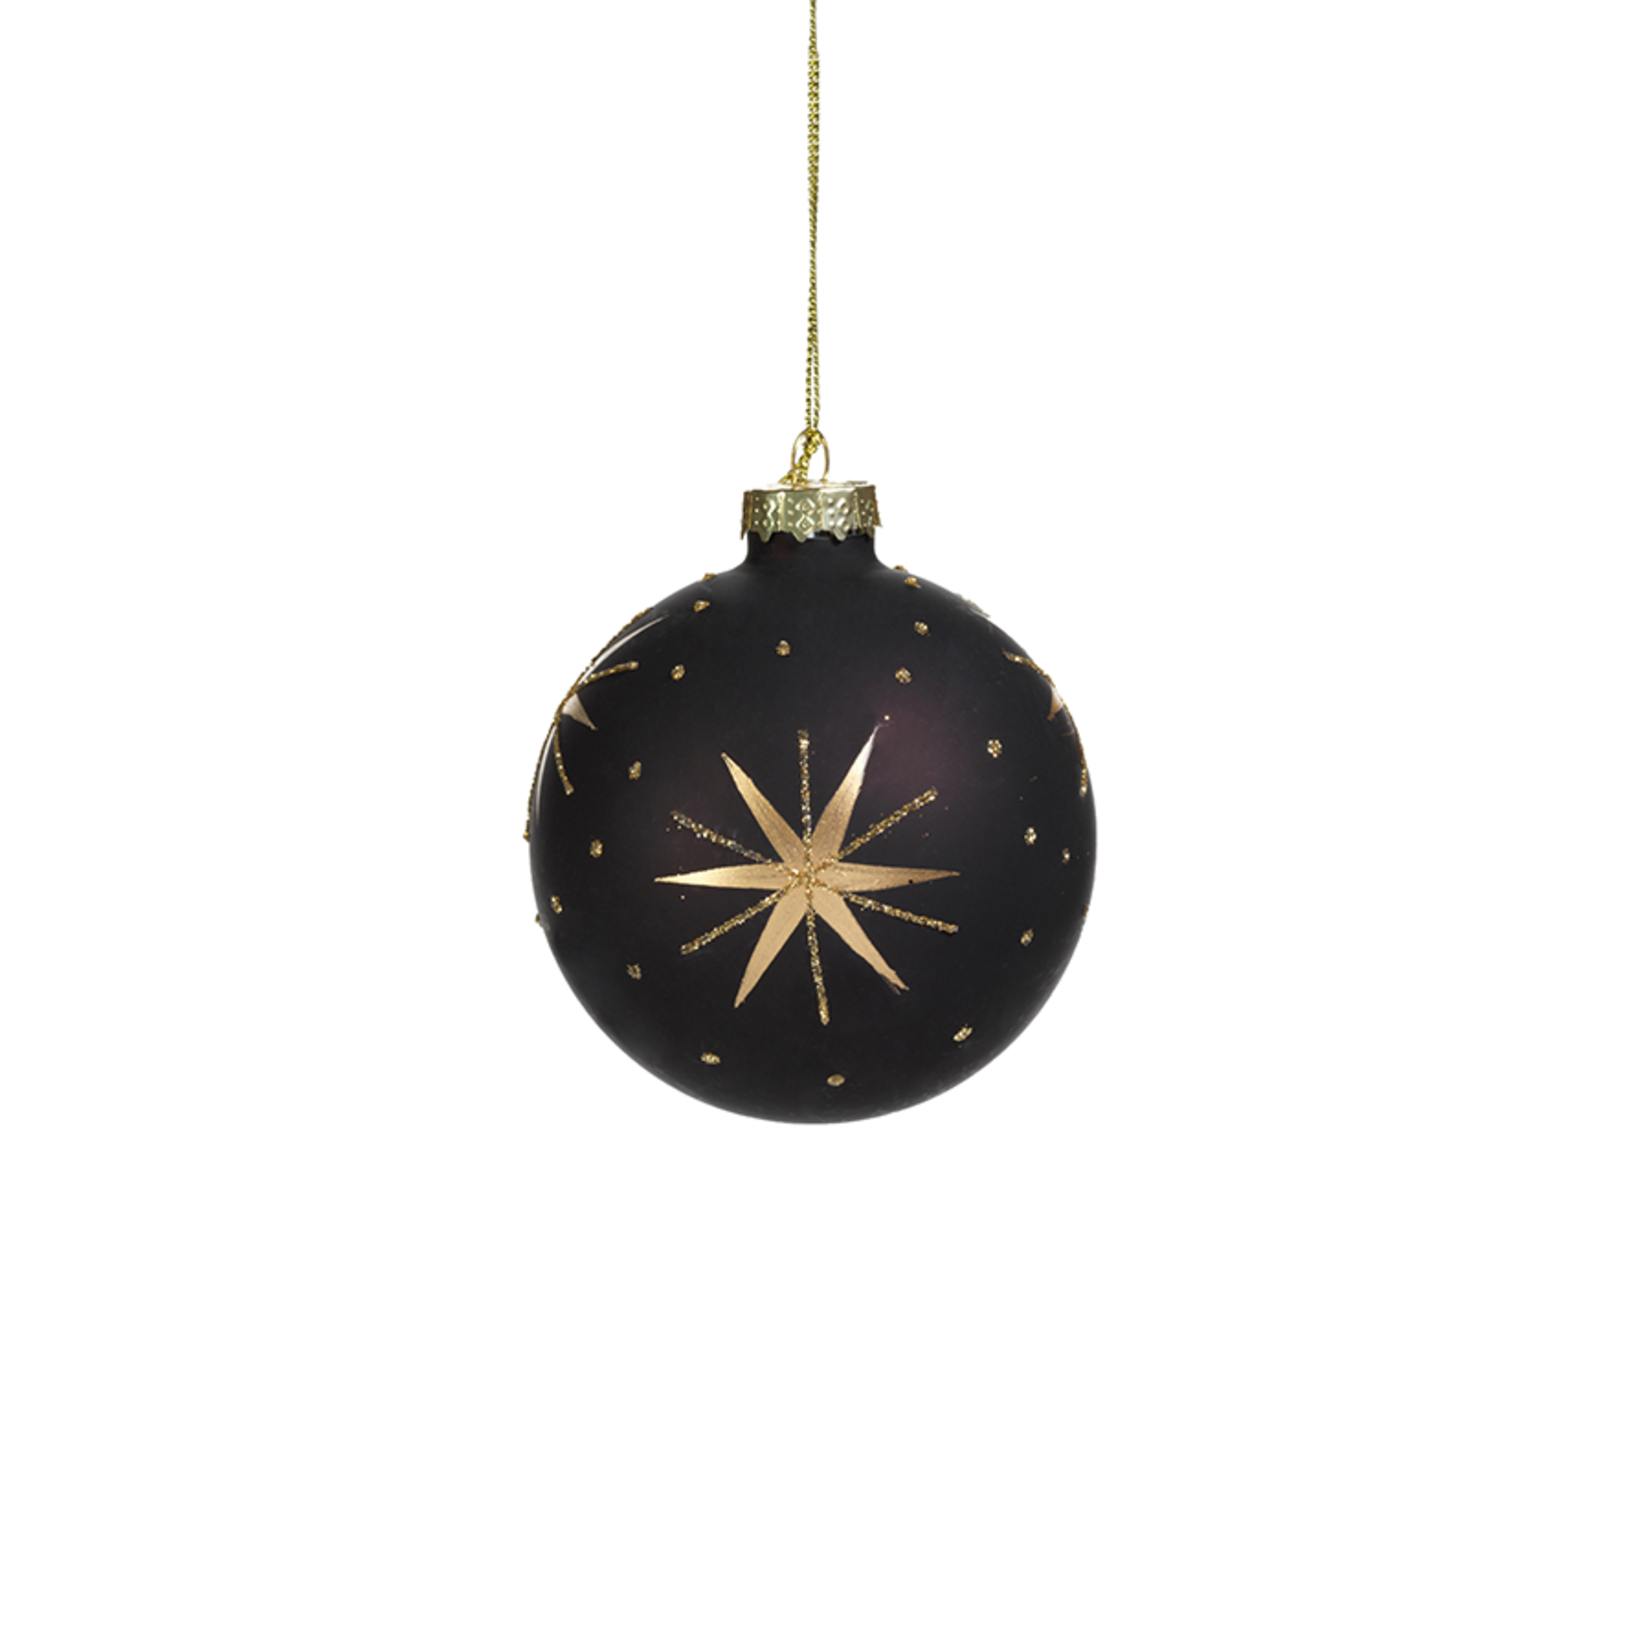 Zodax Gold and Black Star Ornament 4"